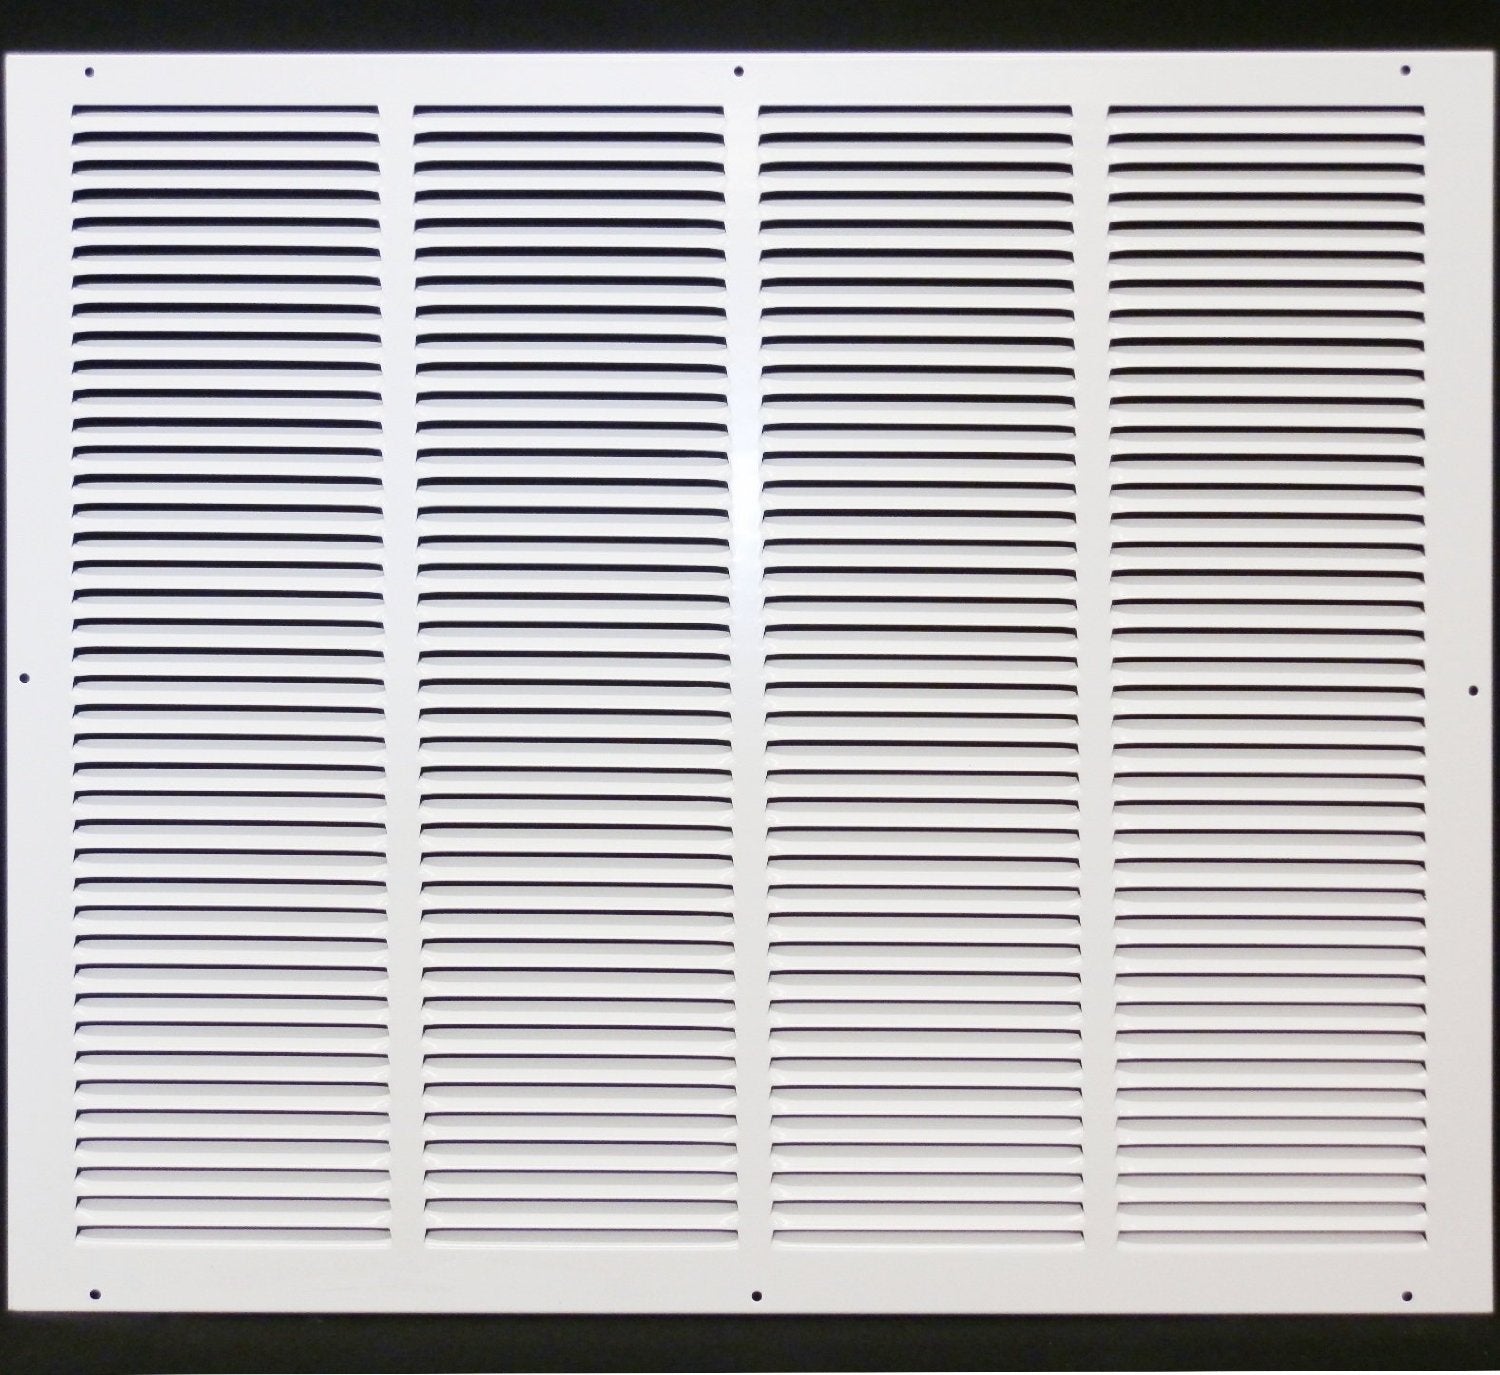 24" X 20" Air Vent Return Grilles - Sidewall and Ceiling - Steel